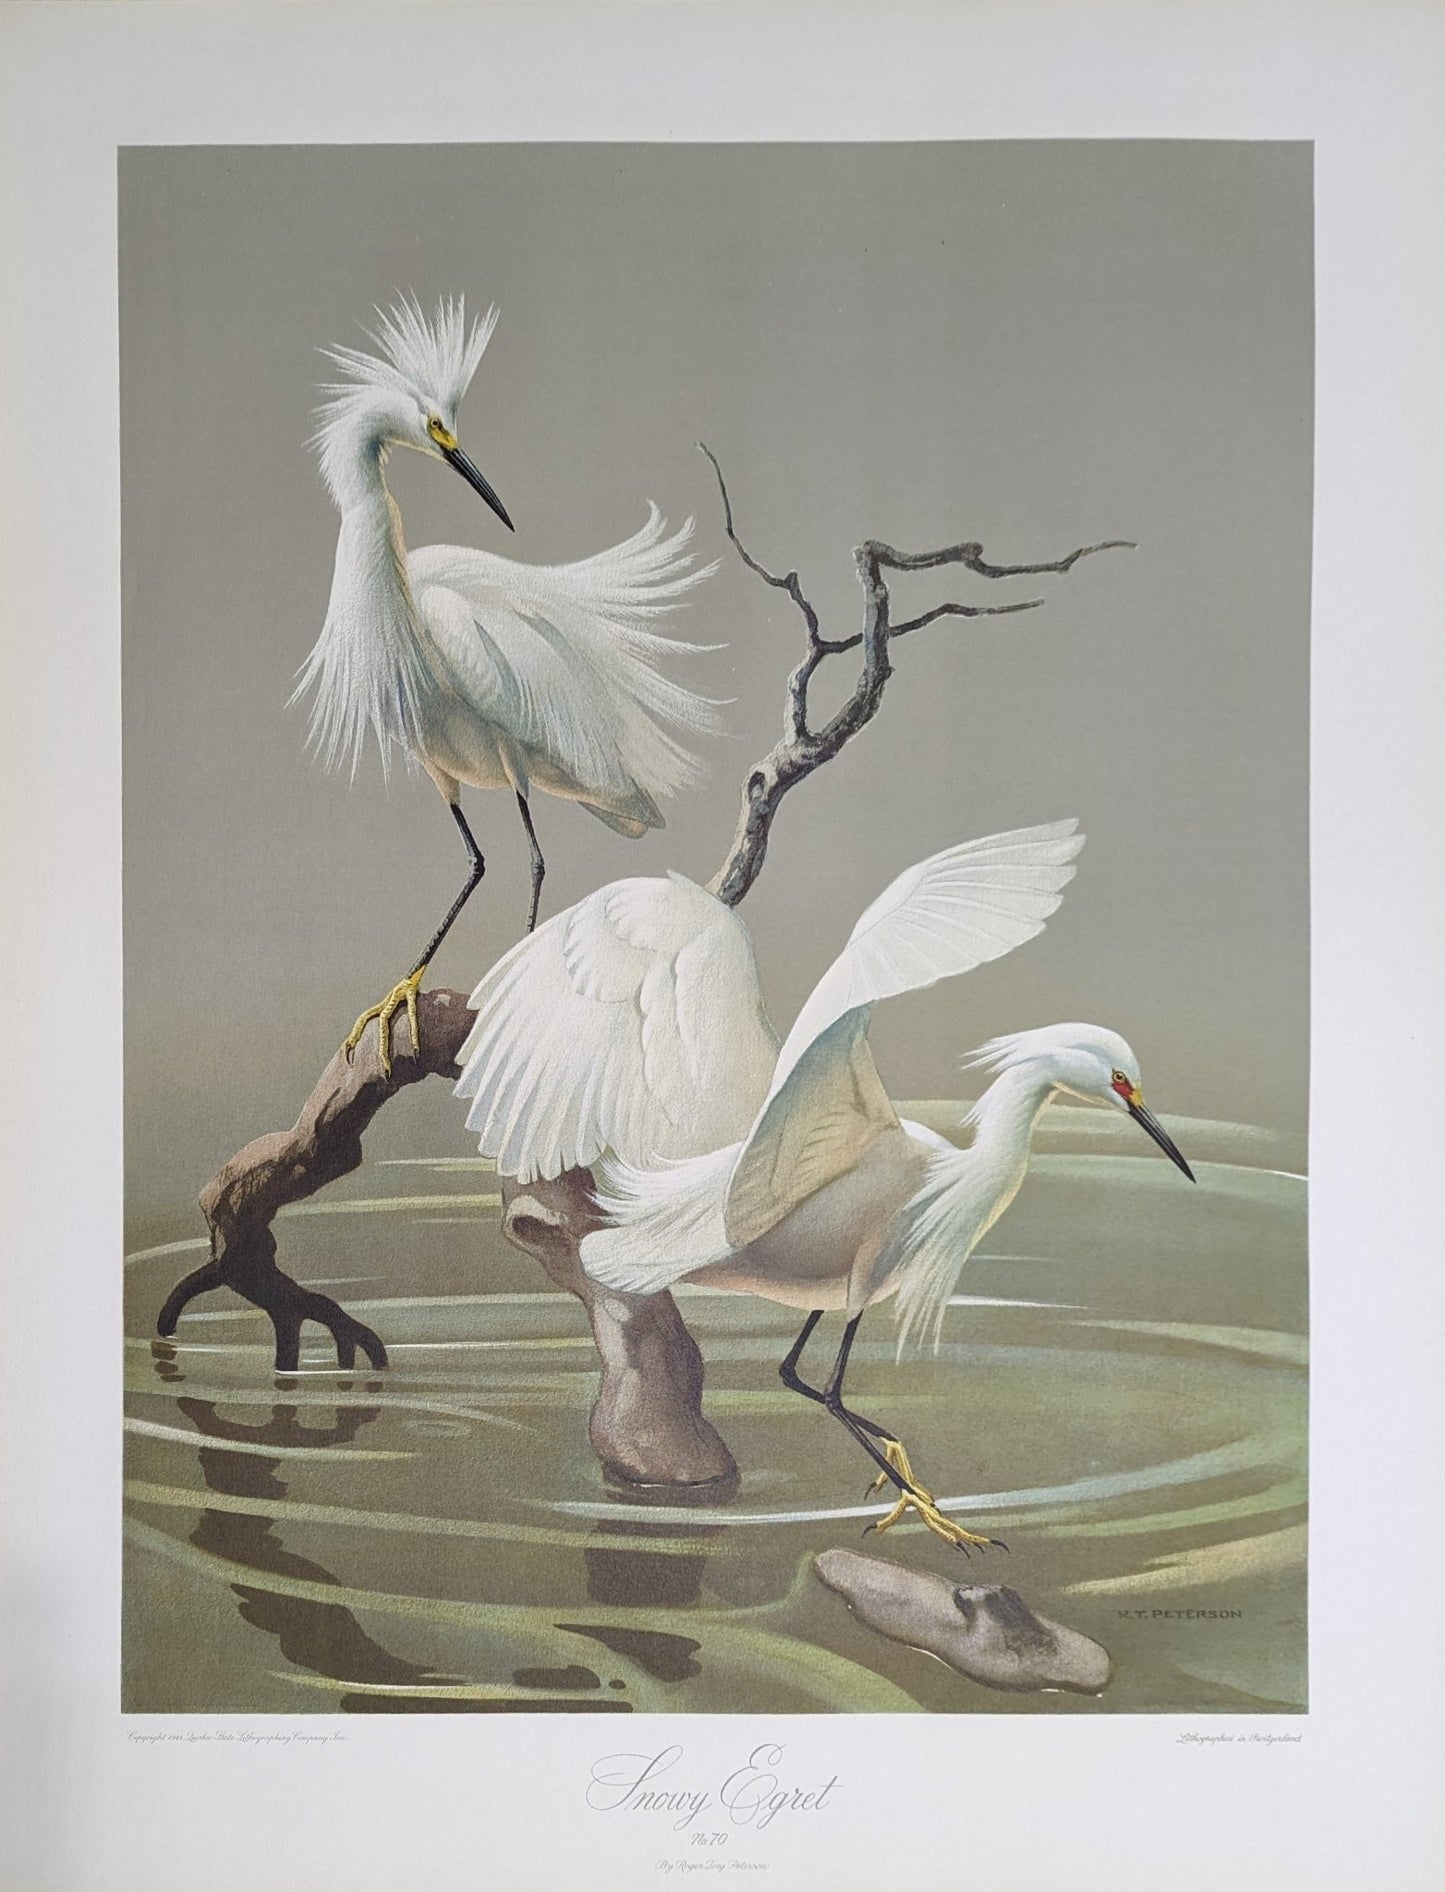 Snowy Egrets by Roger Tory Peterson, mint condition vintage lithograph printed in the 1940s - Offset Lithograph - Pink Flamingos